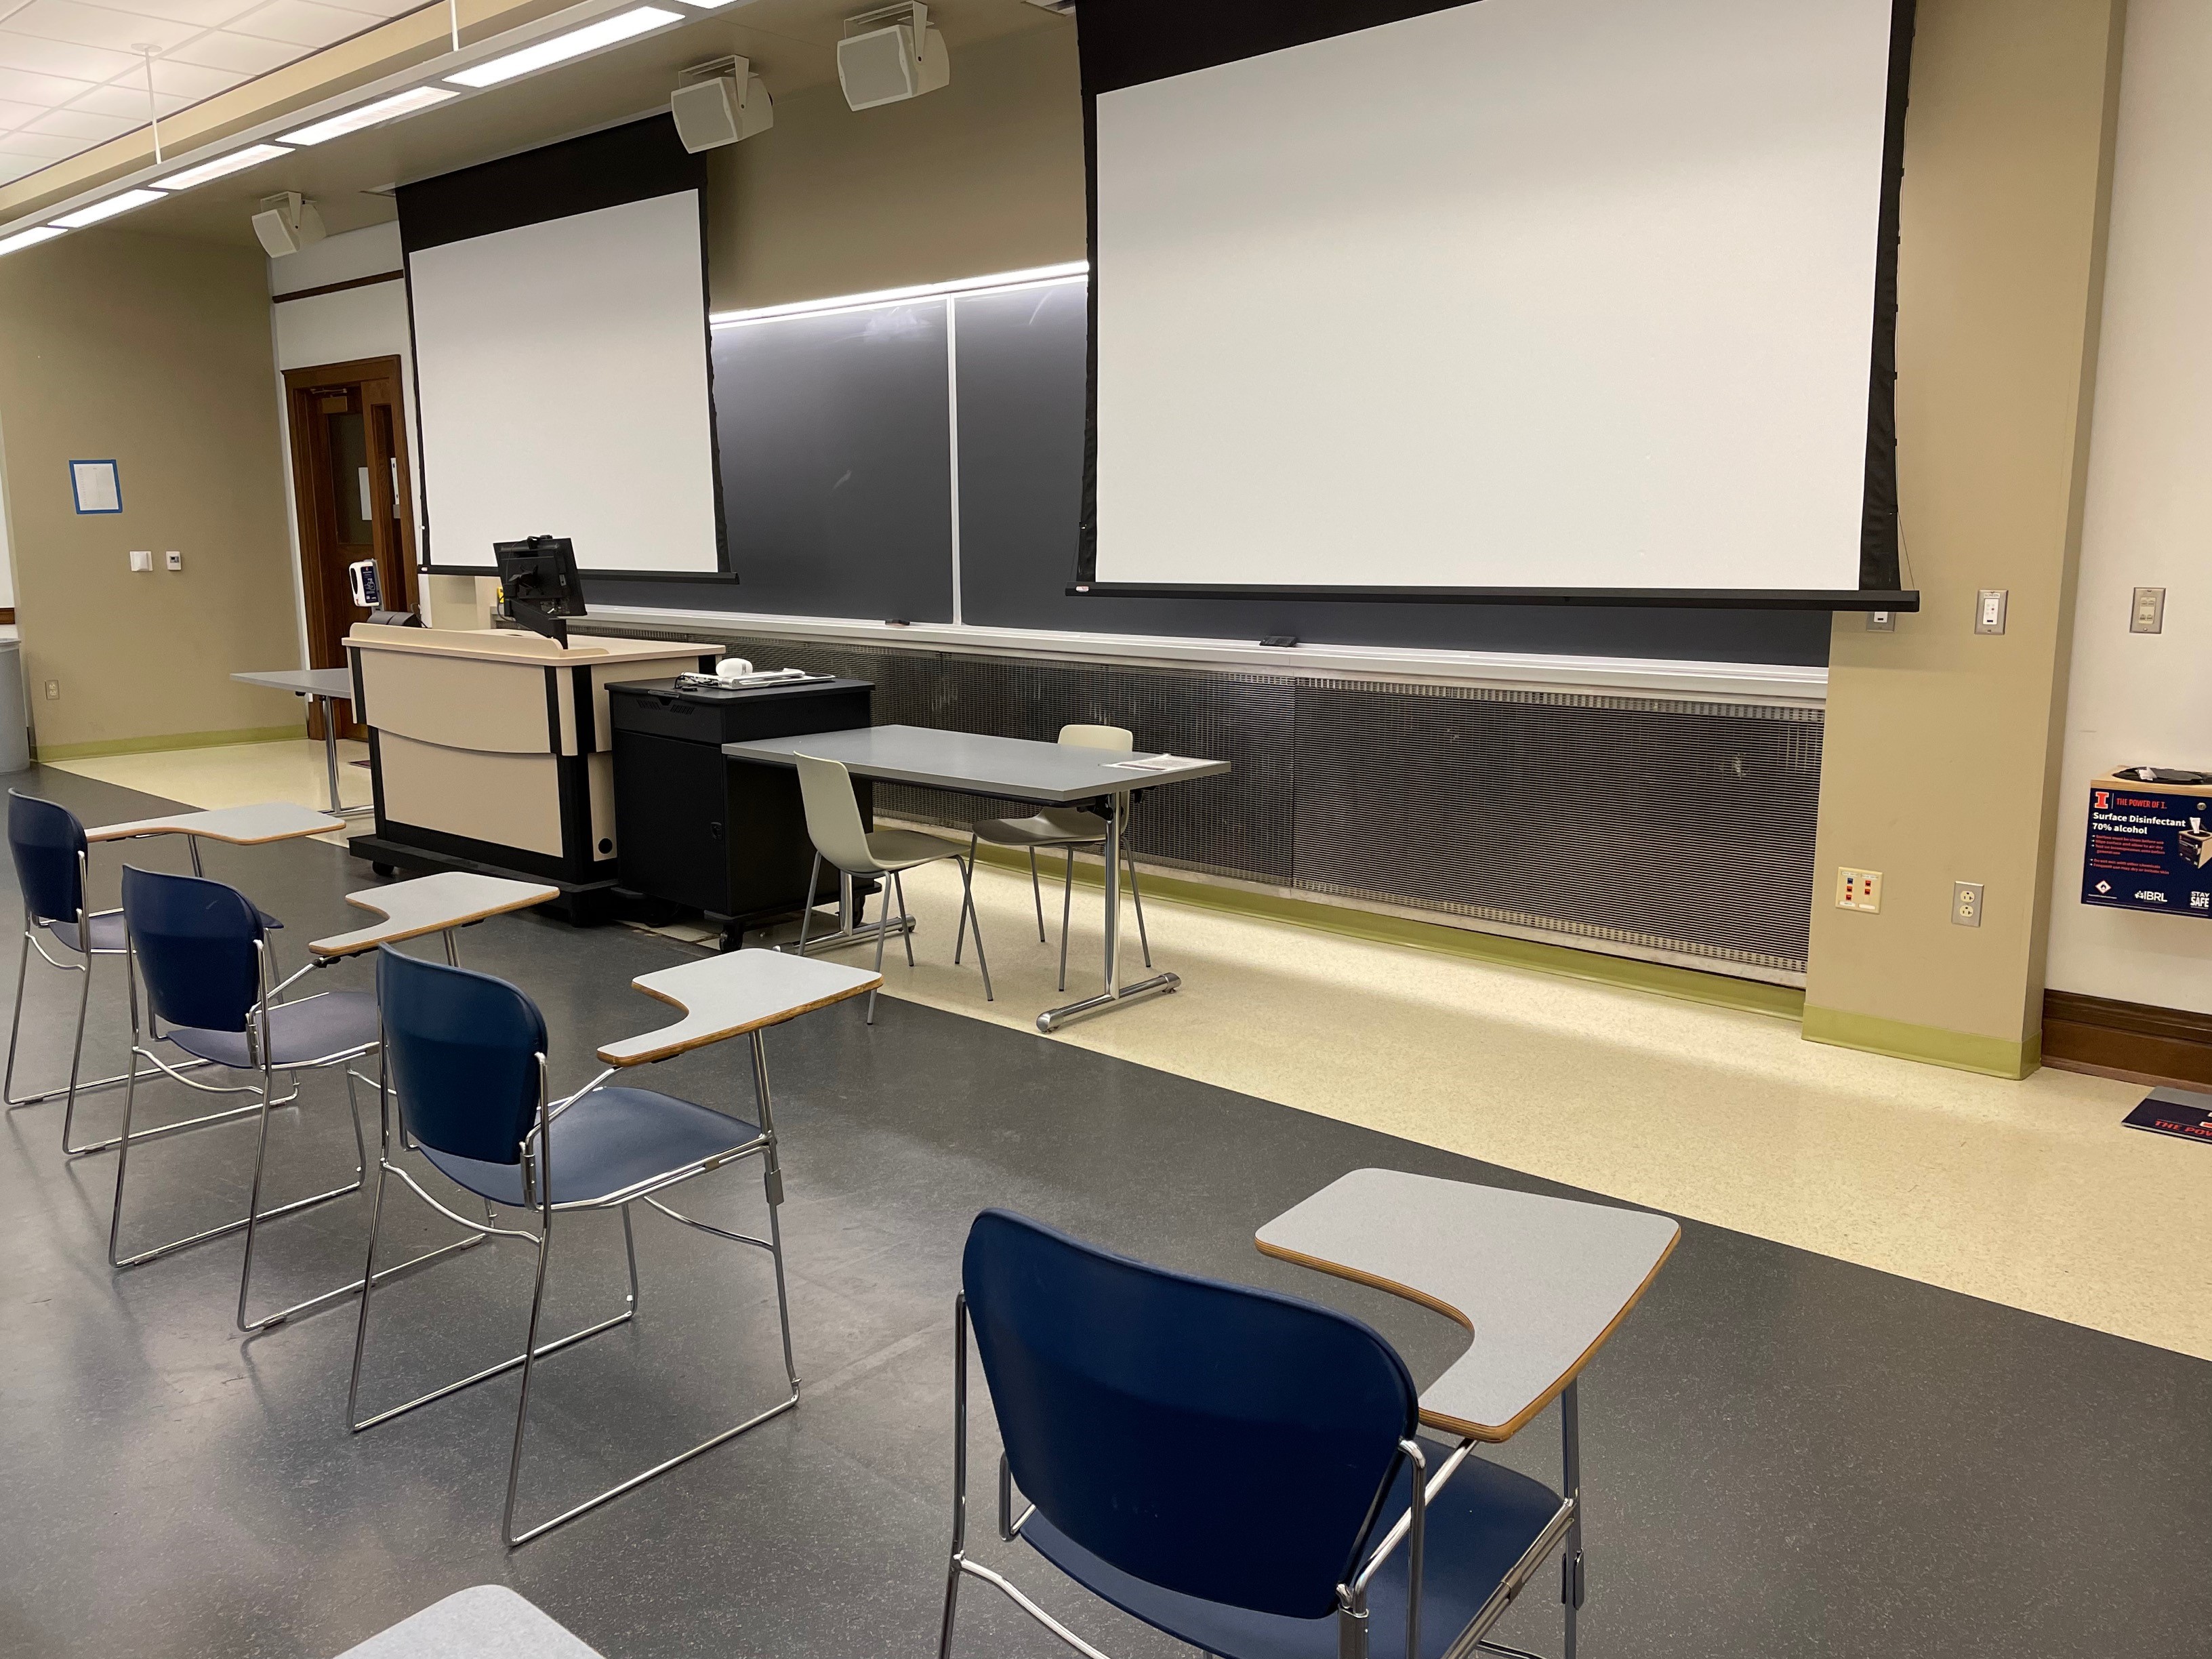 A view of the classroom with moveable tableted arm chairs, chalkboard, and instructor table in front.